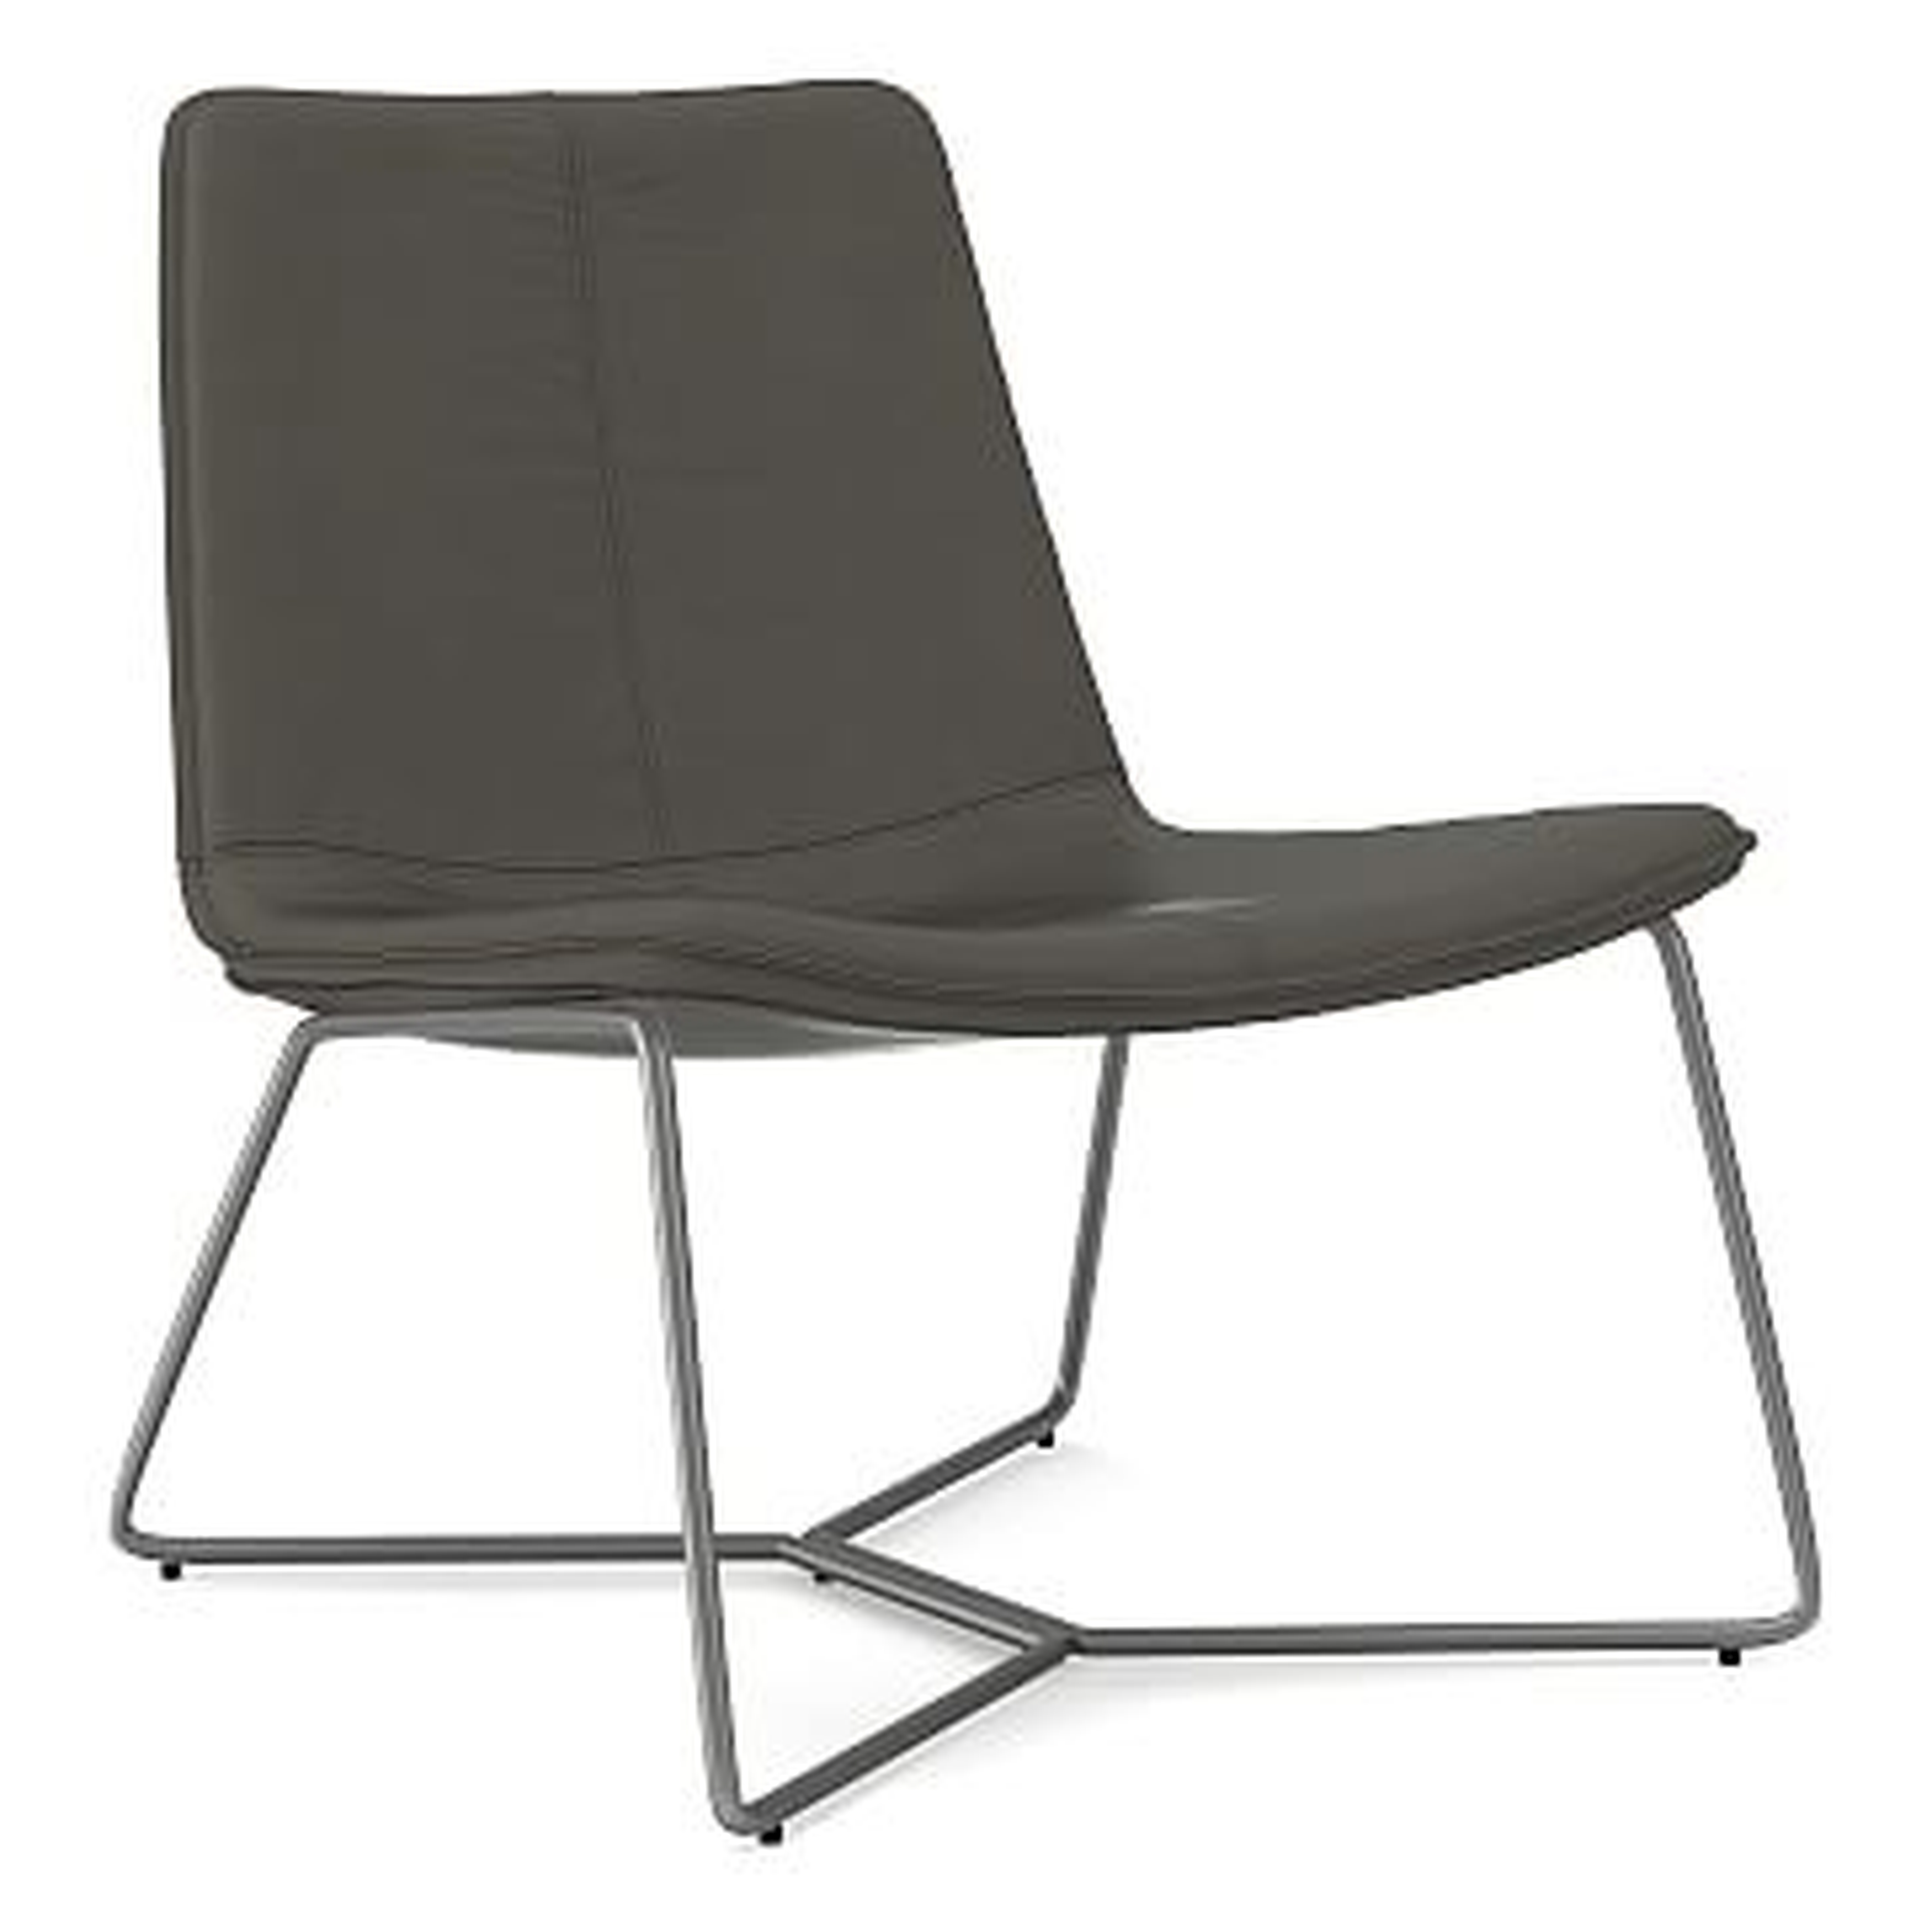 Slope Lounge Chair, Poly, Vegan Leather, Cinder, Charcoal - West Elm